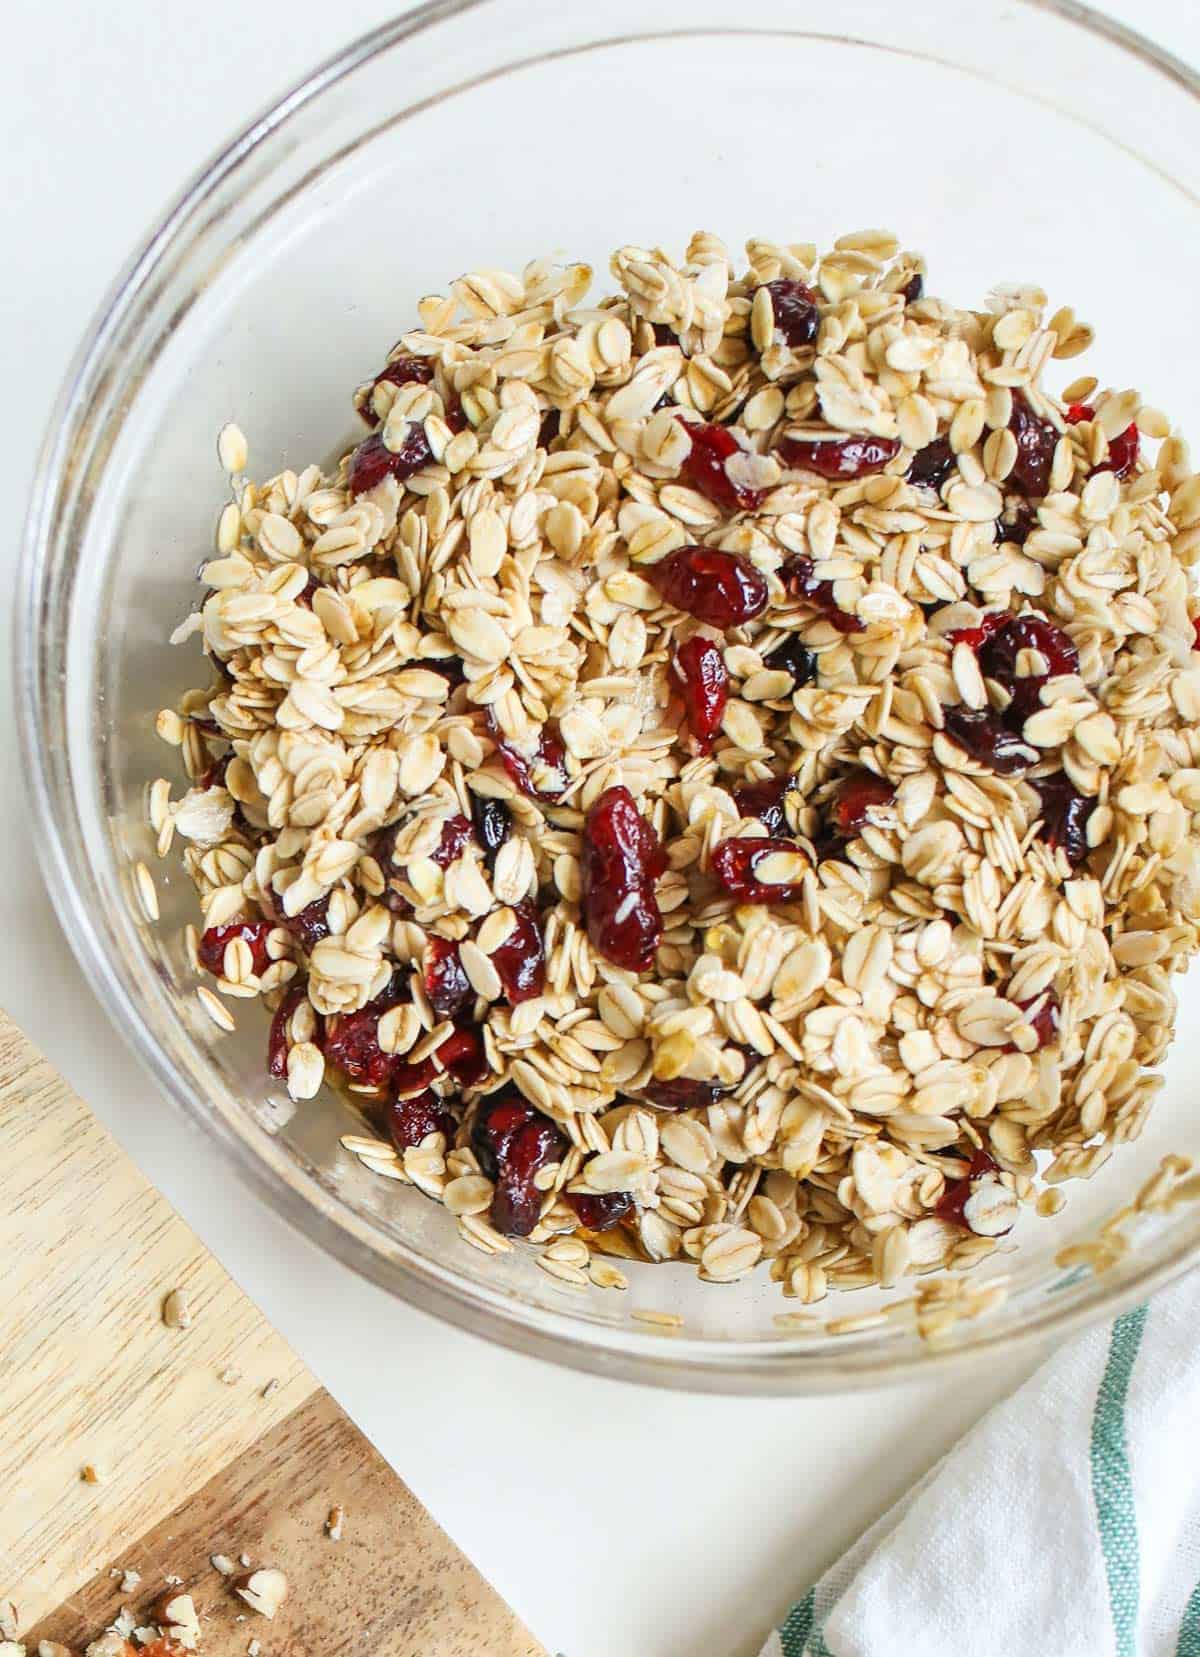 A bowl of raw oats and dried cranberries.